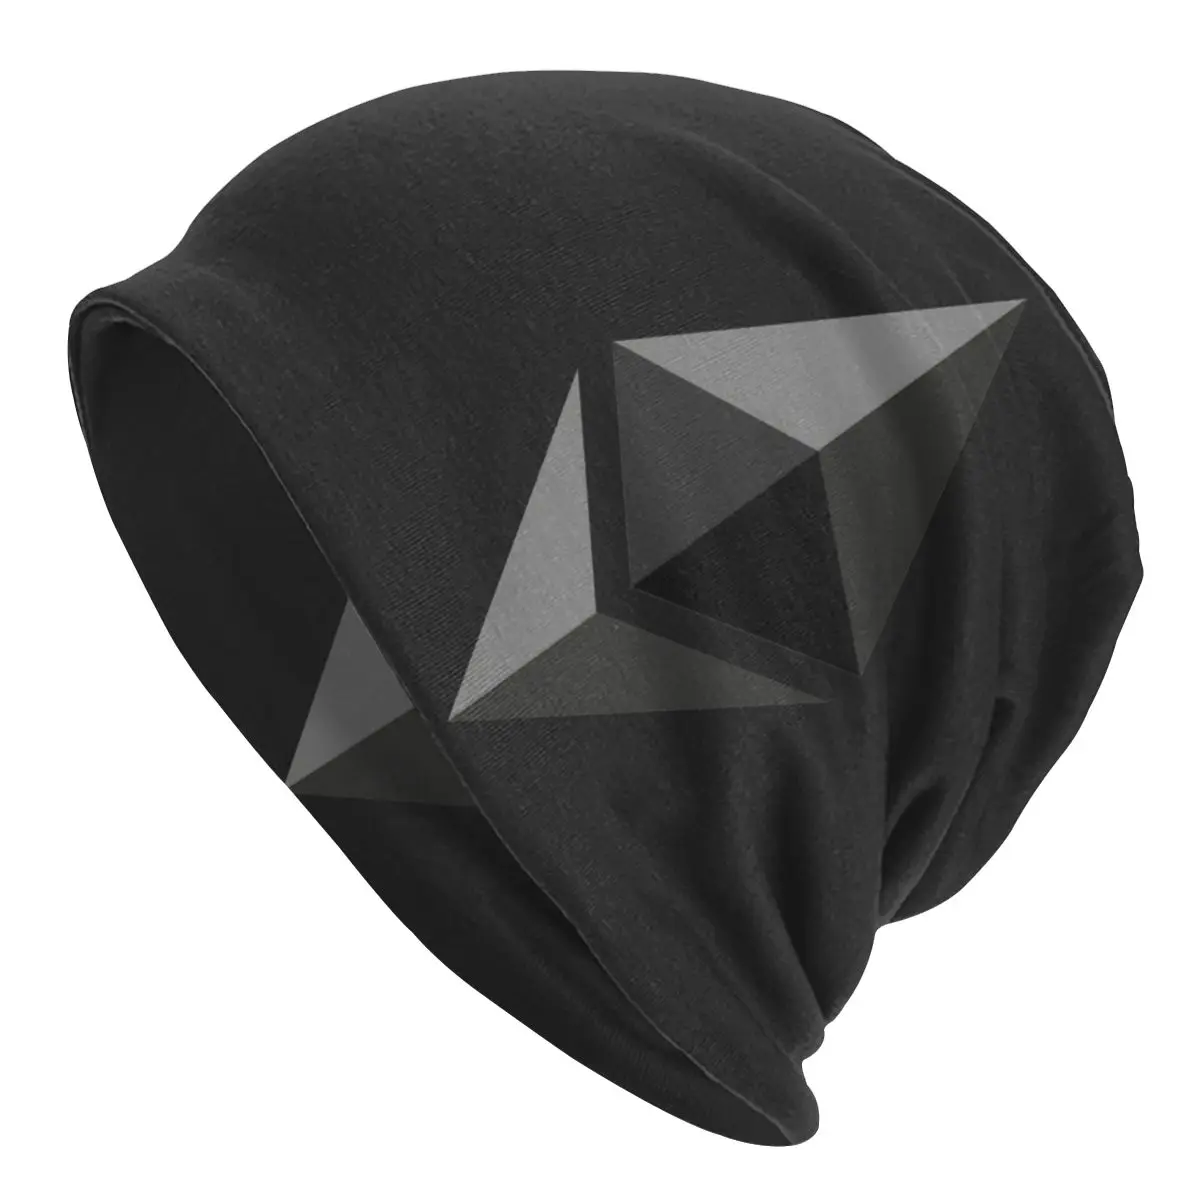 

Adult Men's Knit Hat Ethereum Crypto Currency Bonnet Hats sun casquette Trading Novelty Unisex Skullies Beanies Caps